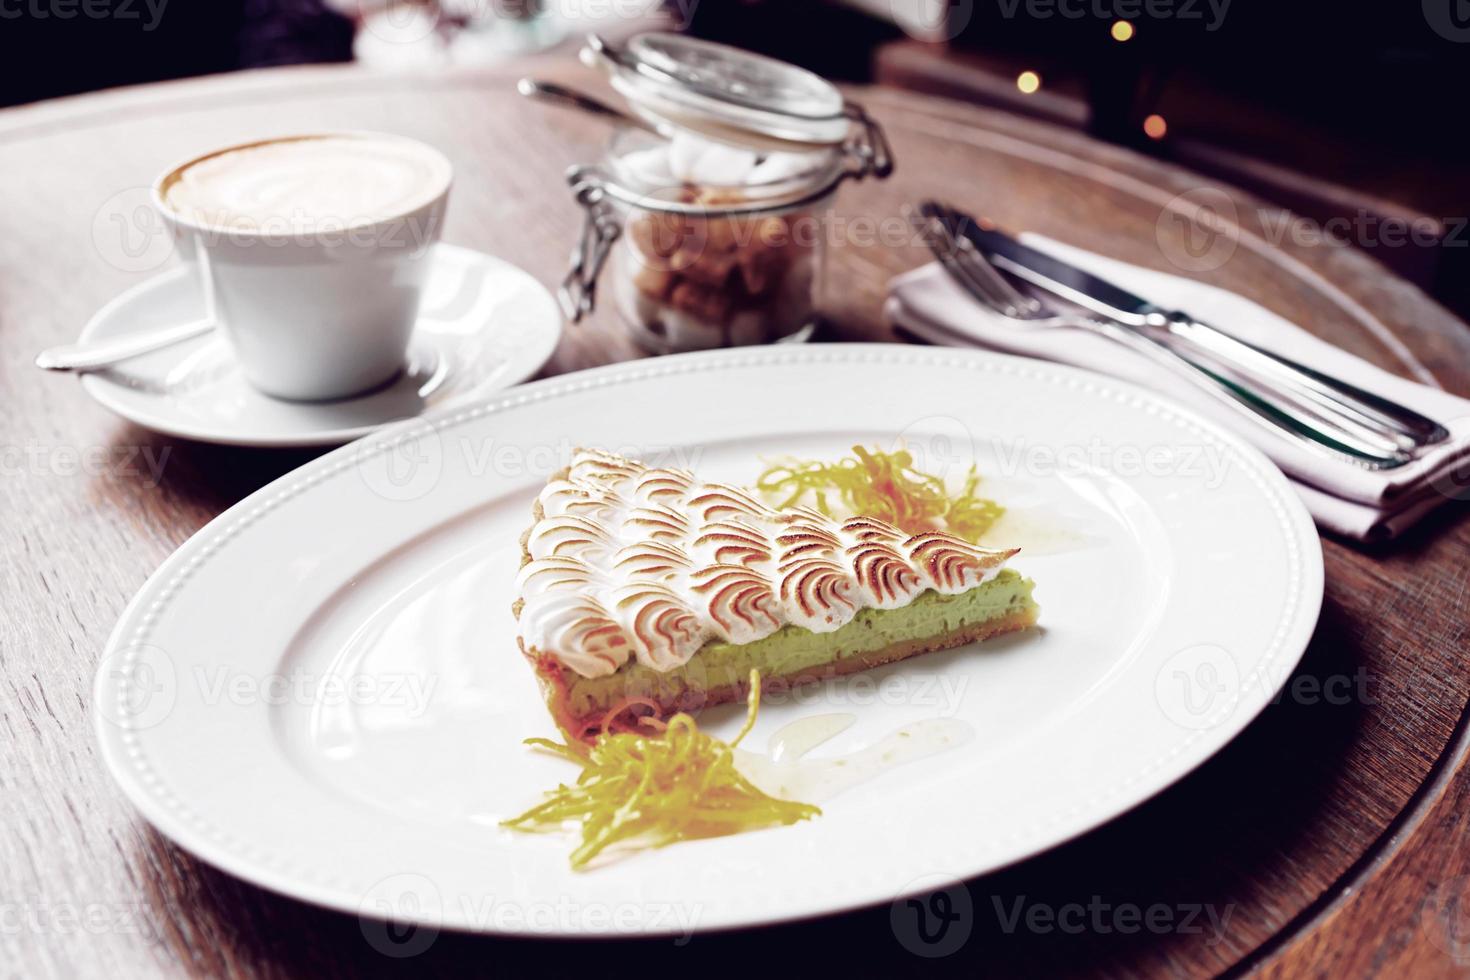 Meringue dessert with coffee, morning meal photo